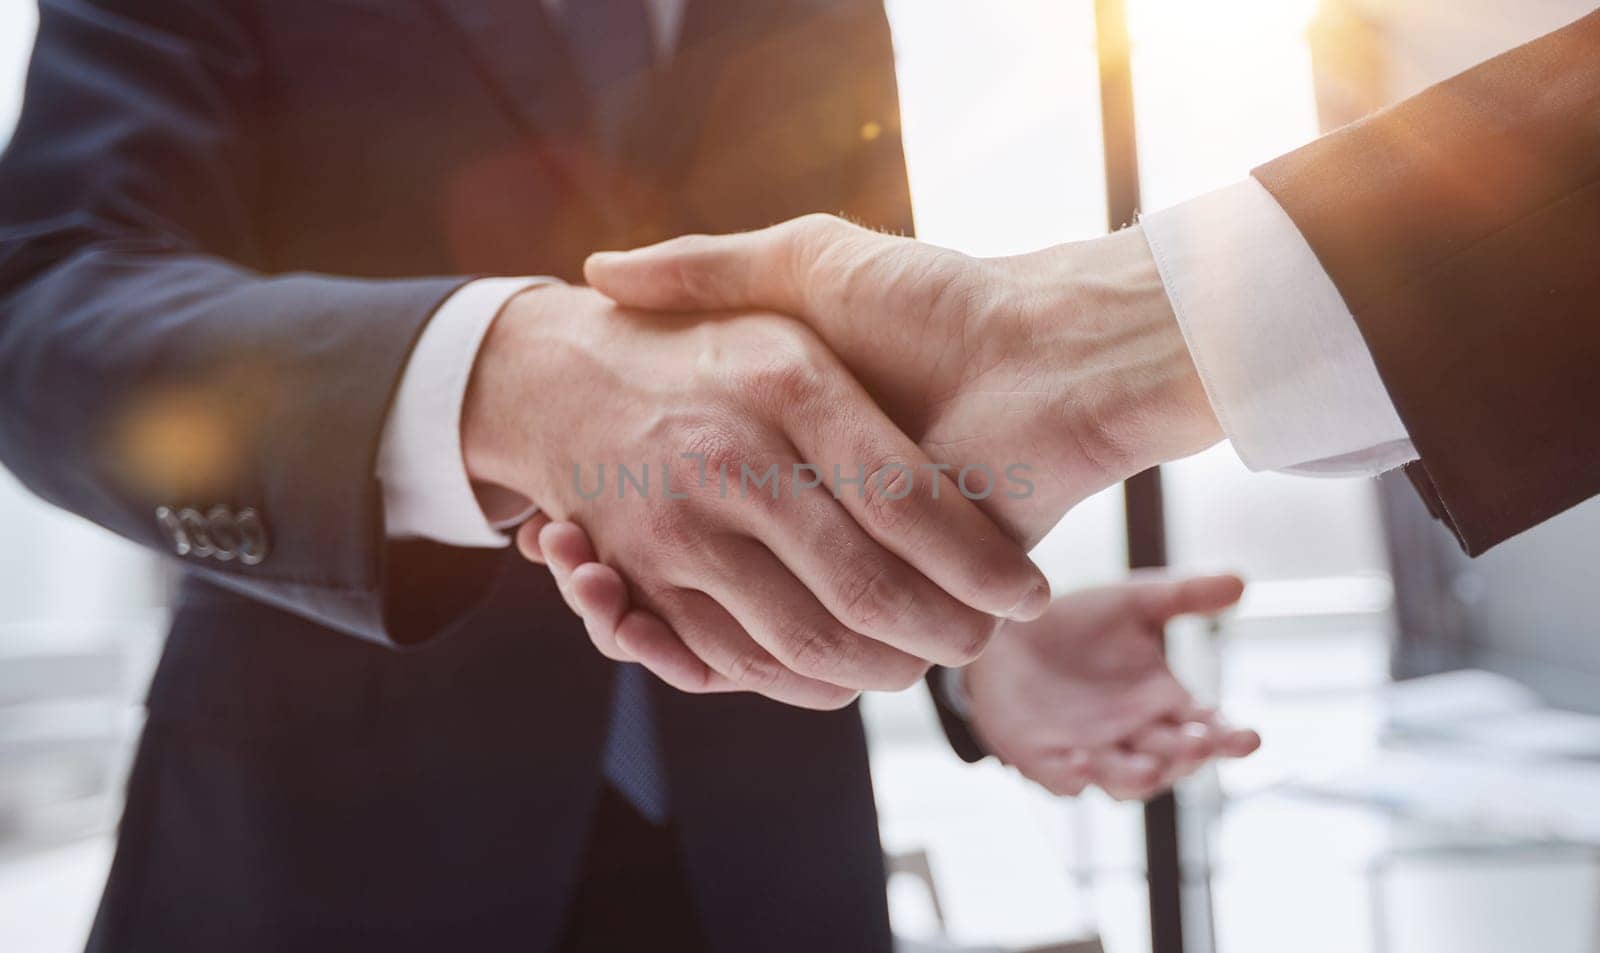 People Shaking Hands at Meeting Close Up